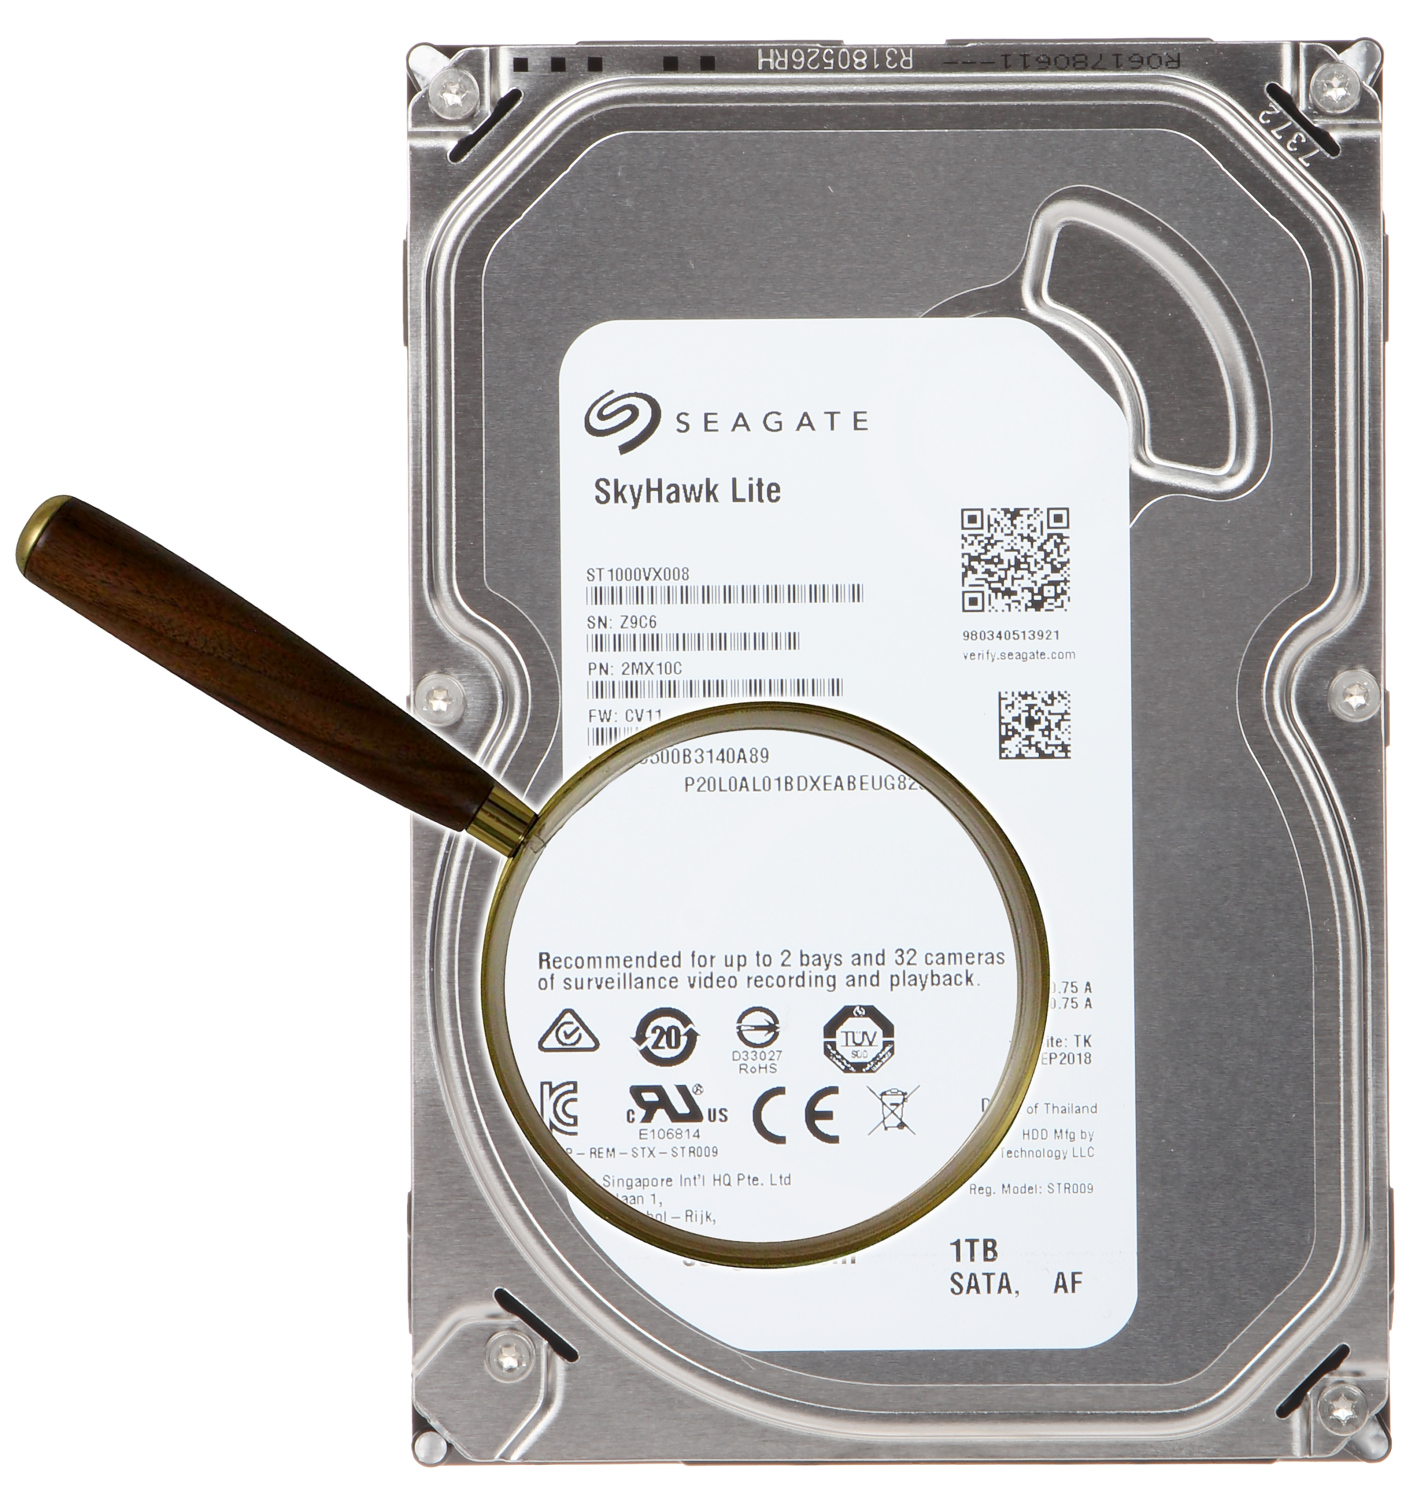 ST10000VE001  Disque dur HDD HDD 10 To Installation interne SATA